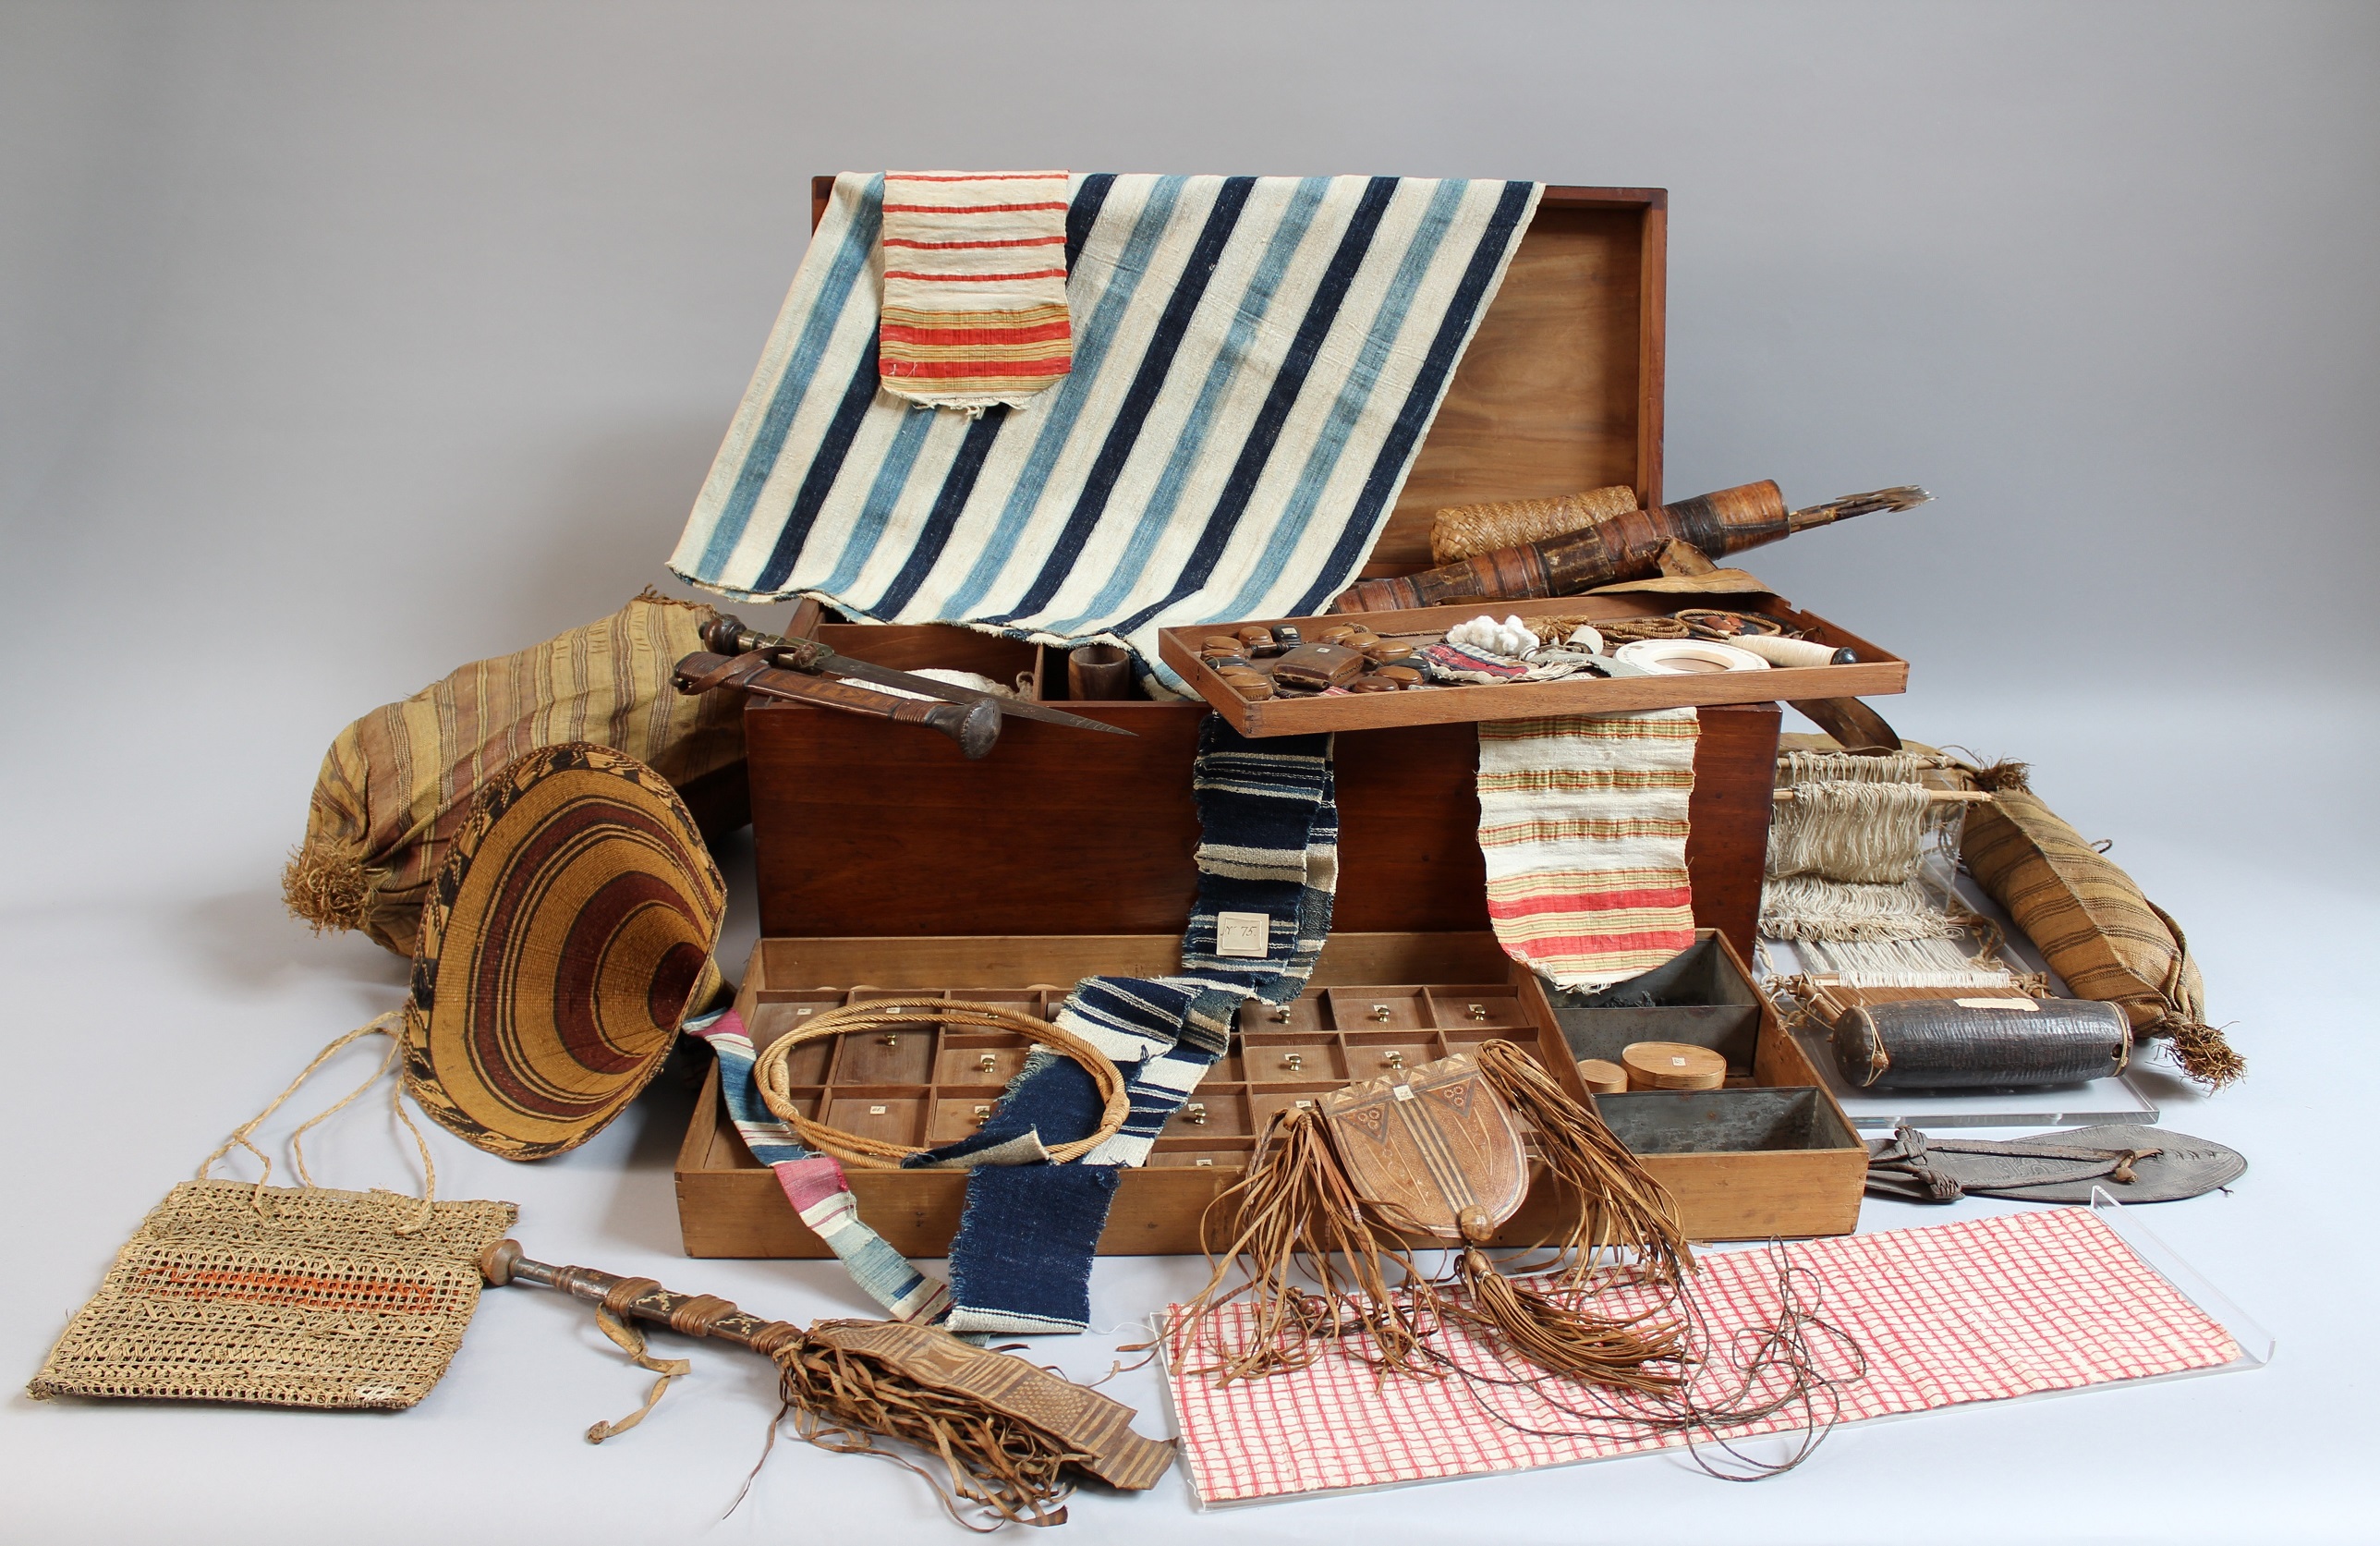 West African textiles from Thomas Clarkson's campaign chest in a  ground-breaking research project